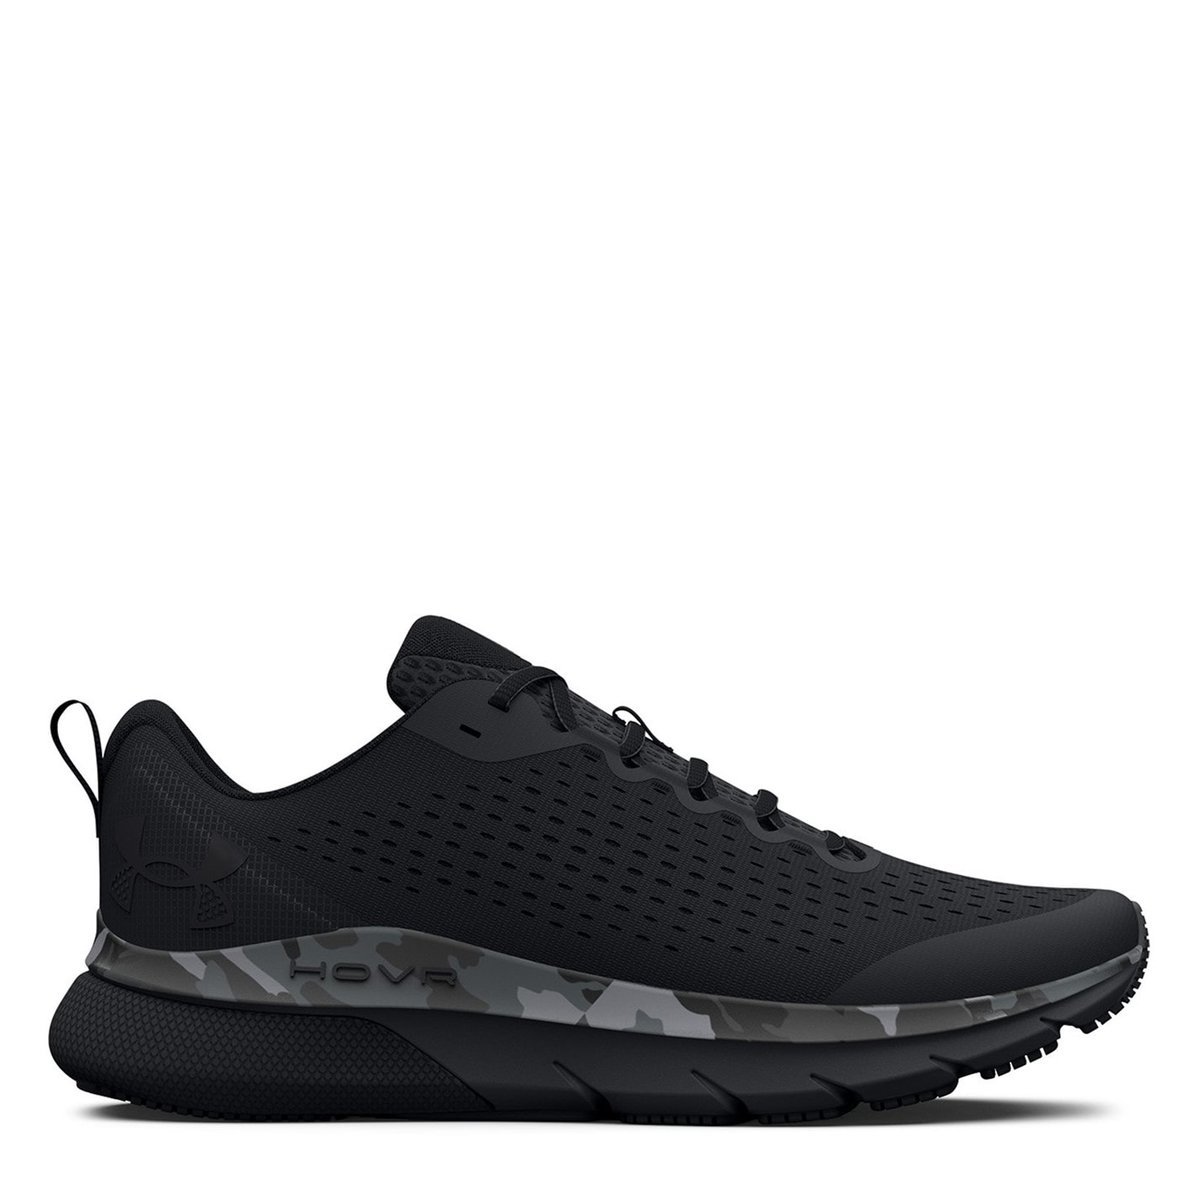 Under Armour HOVR Sonic 6 Storm - Running shoes Men's, Free EU Delivery